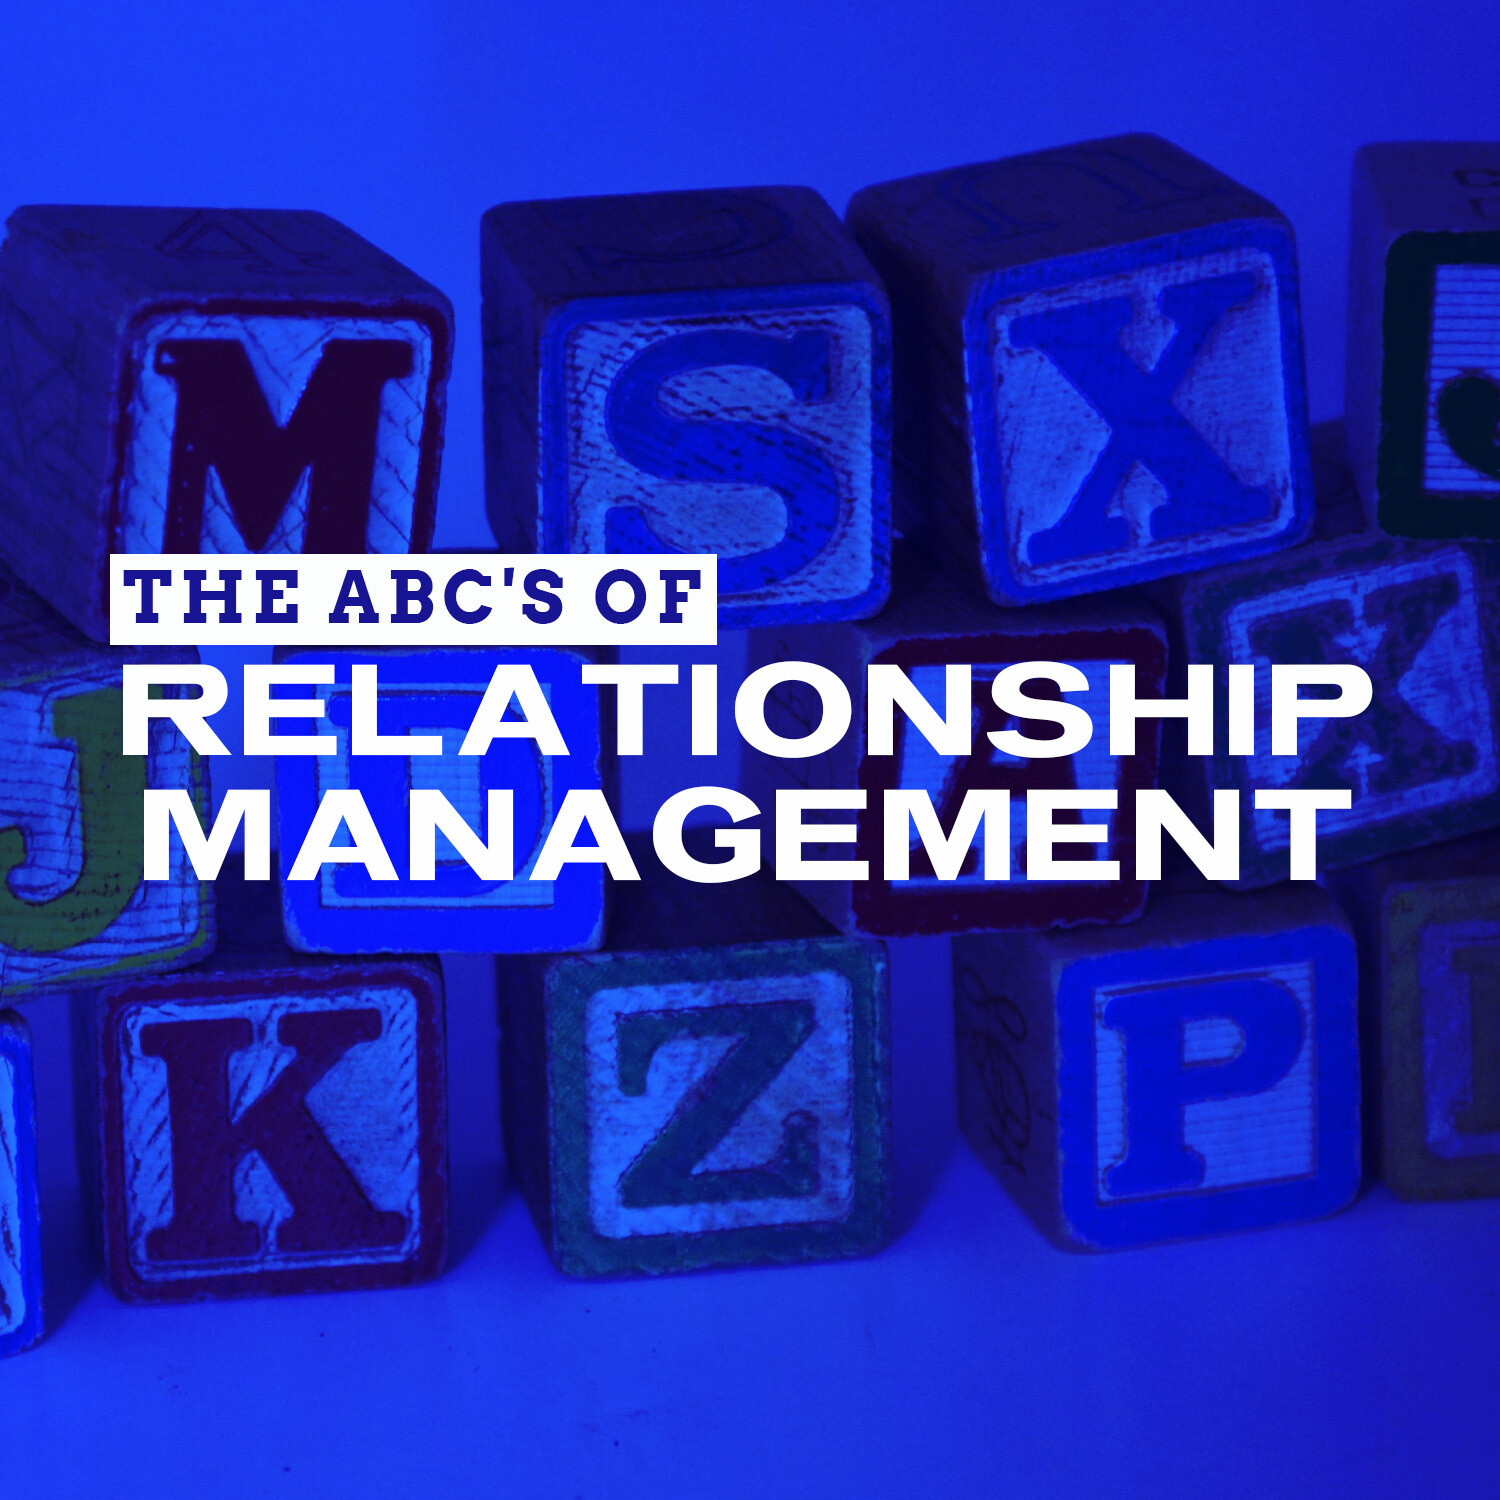 The ABC's of Relationship Management Part 2 | Bishop Herbert & Dr. Marcia Bailey